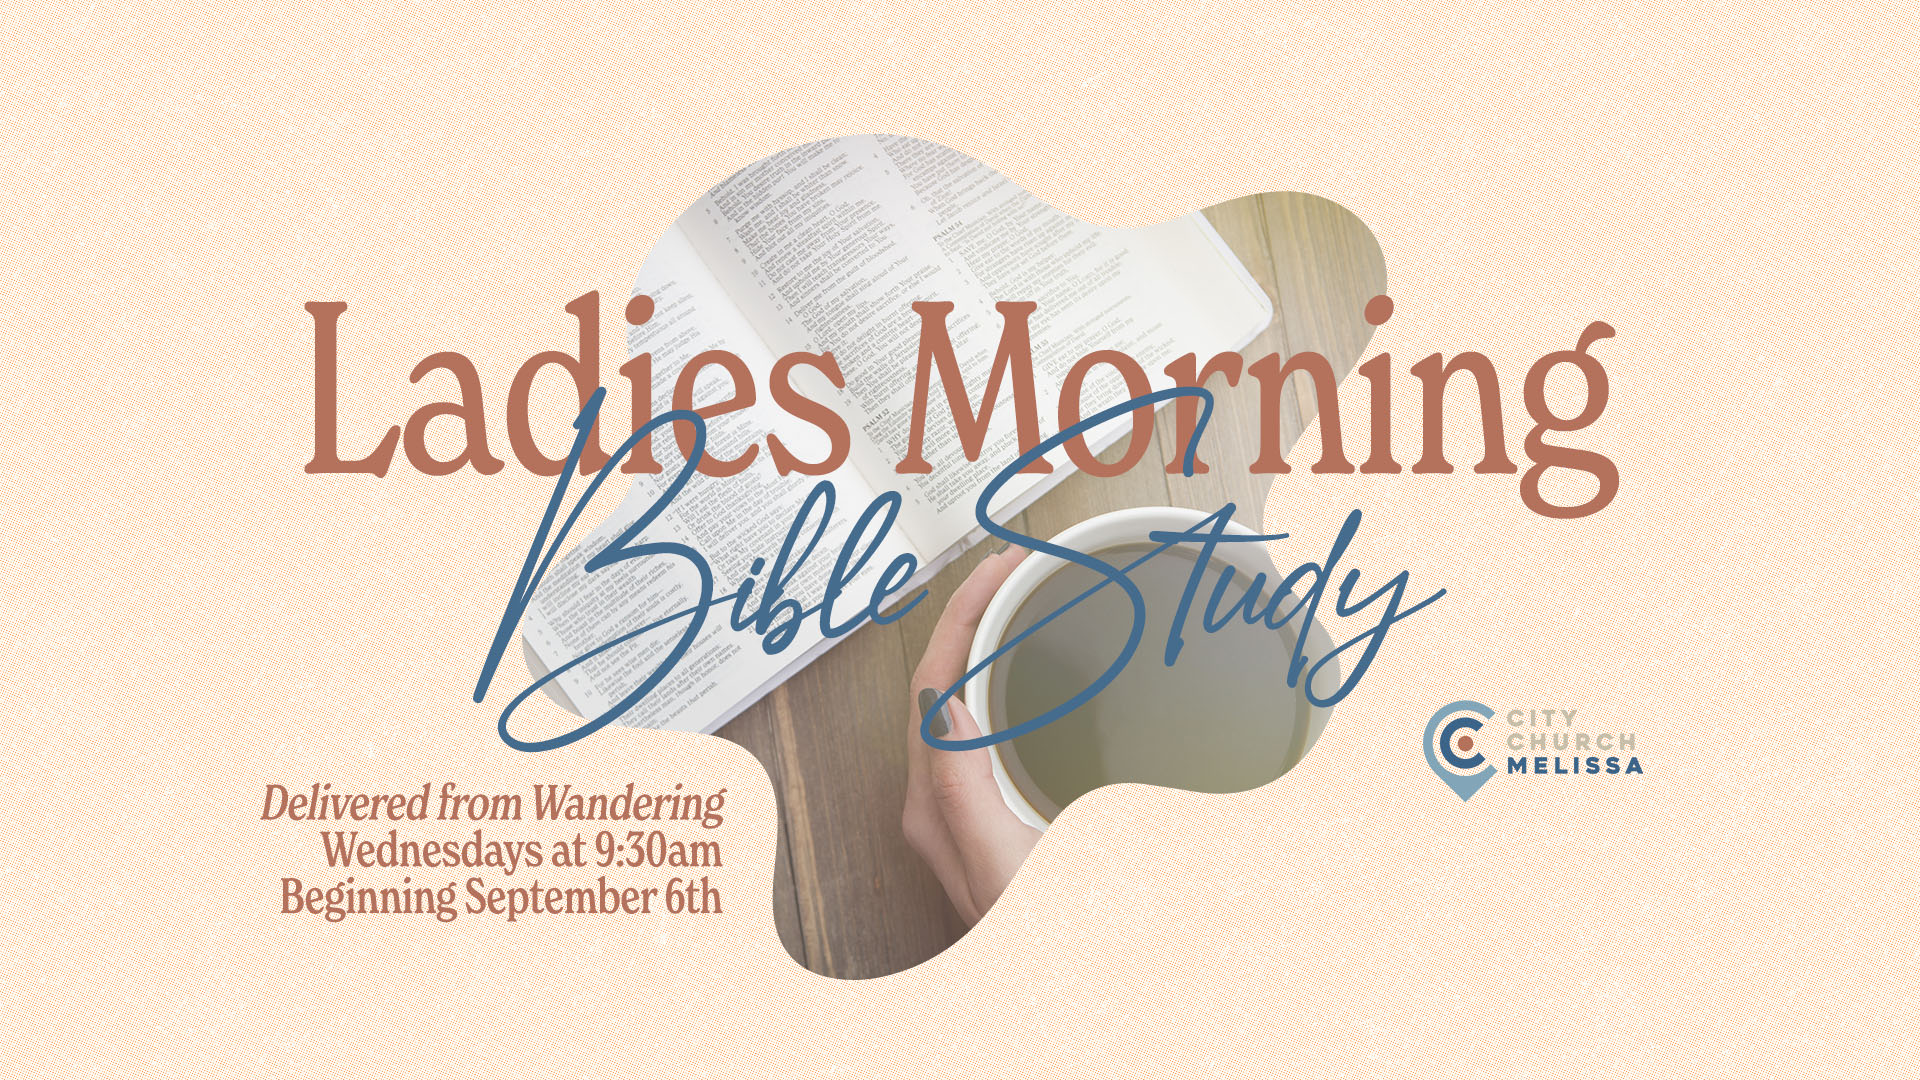 Ladies, our morning Bible Study returns for the Spring semester on Wednesday, September 6th, from 9:30-11:00a! We will be studying Psalm 119 together.

Childcare will be provided for children 6 and under, please <a href="https://citychurchmelissa.churchcenter.com/registrations/events/1886357">REGISTER HERE.</a>